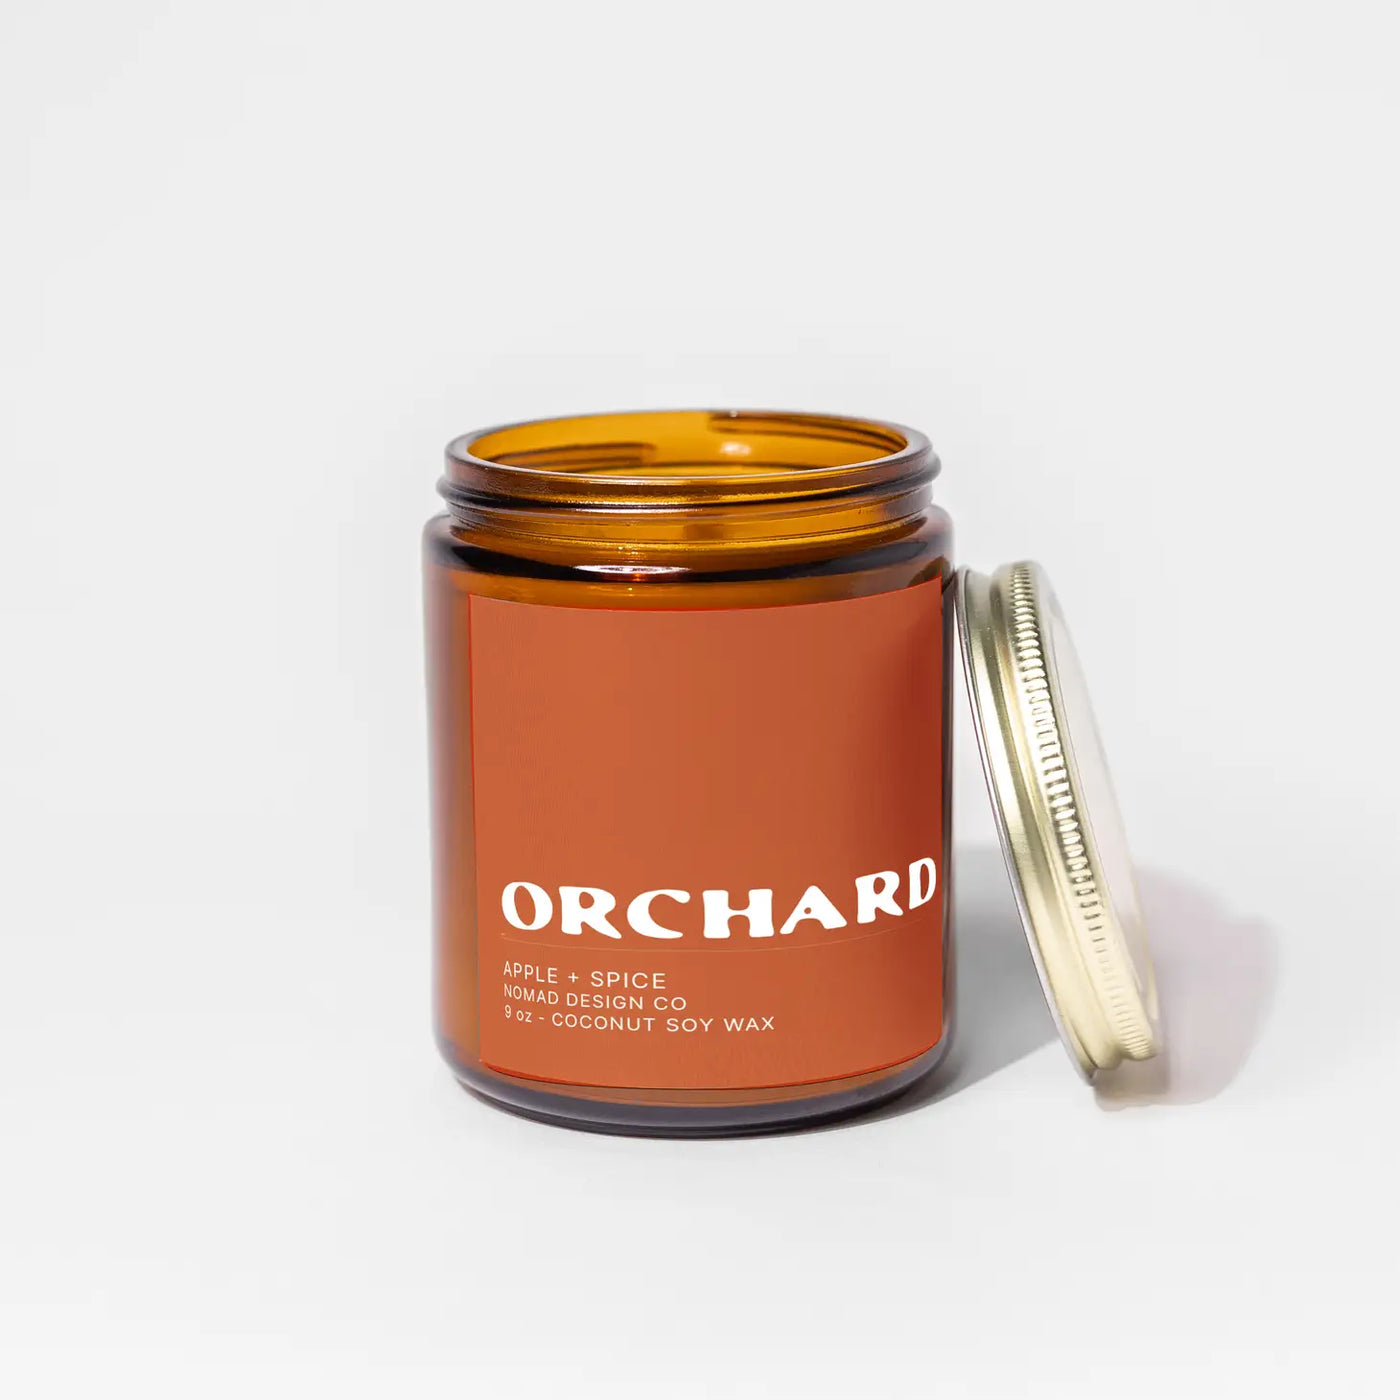 Orchard Candle by Nomad Design